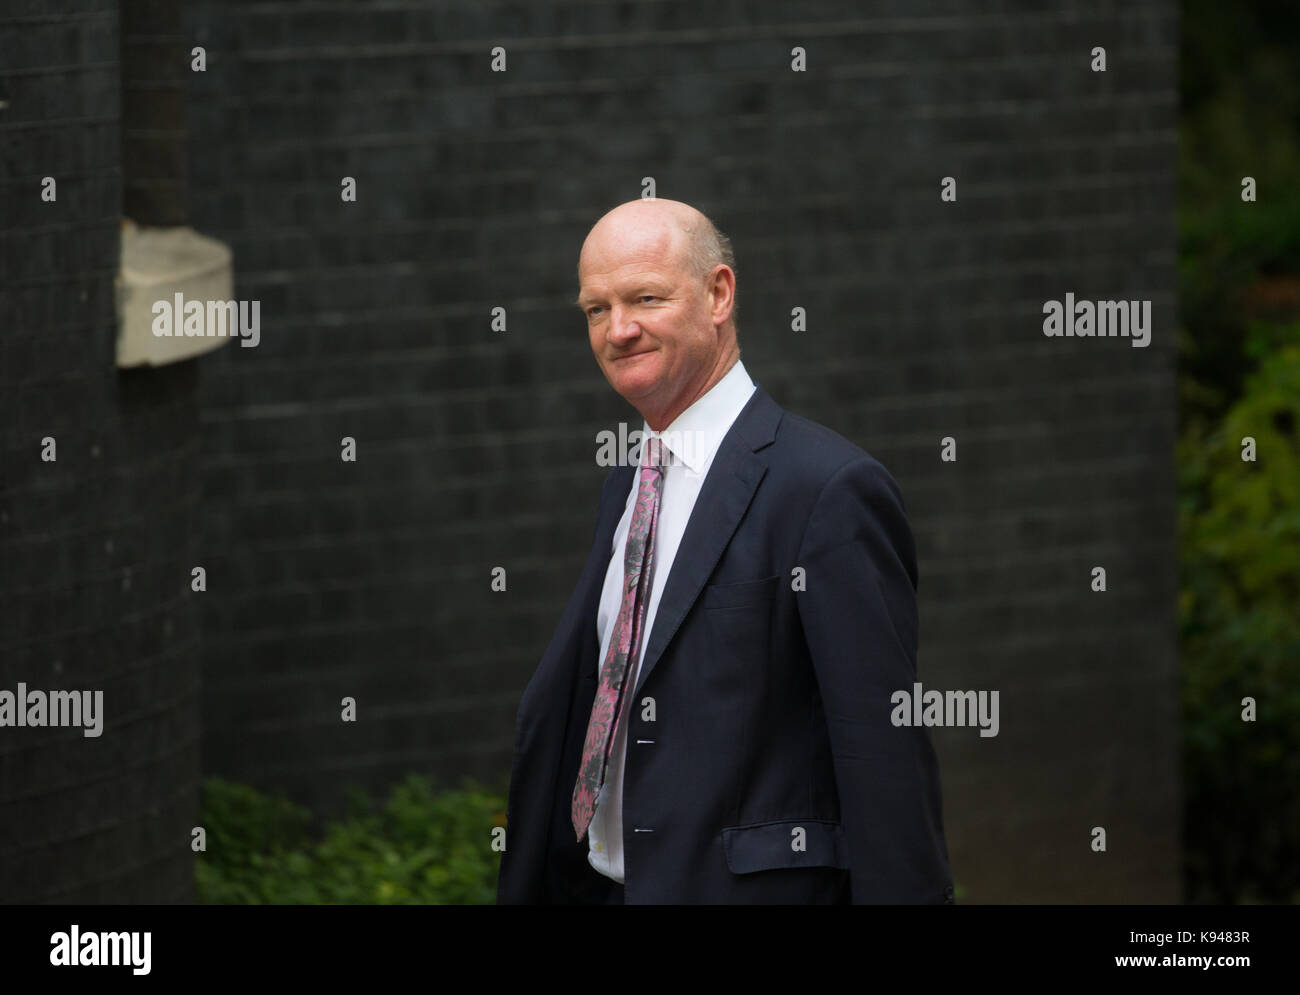 David Willets, Baron Willetts, Minister of State for Universities and Science, arrives at Number 10 Downing Street for a Cabinet meeting. Stock Photo